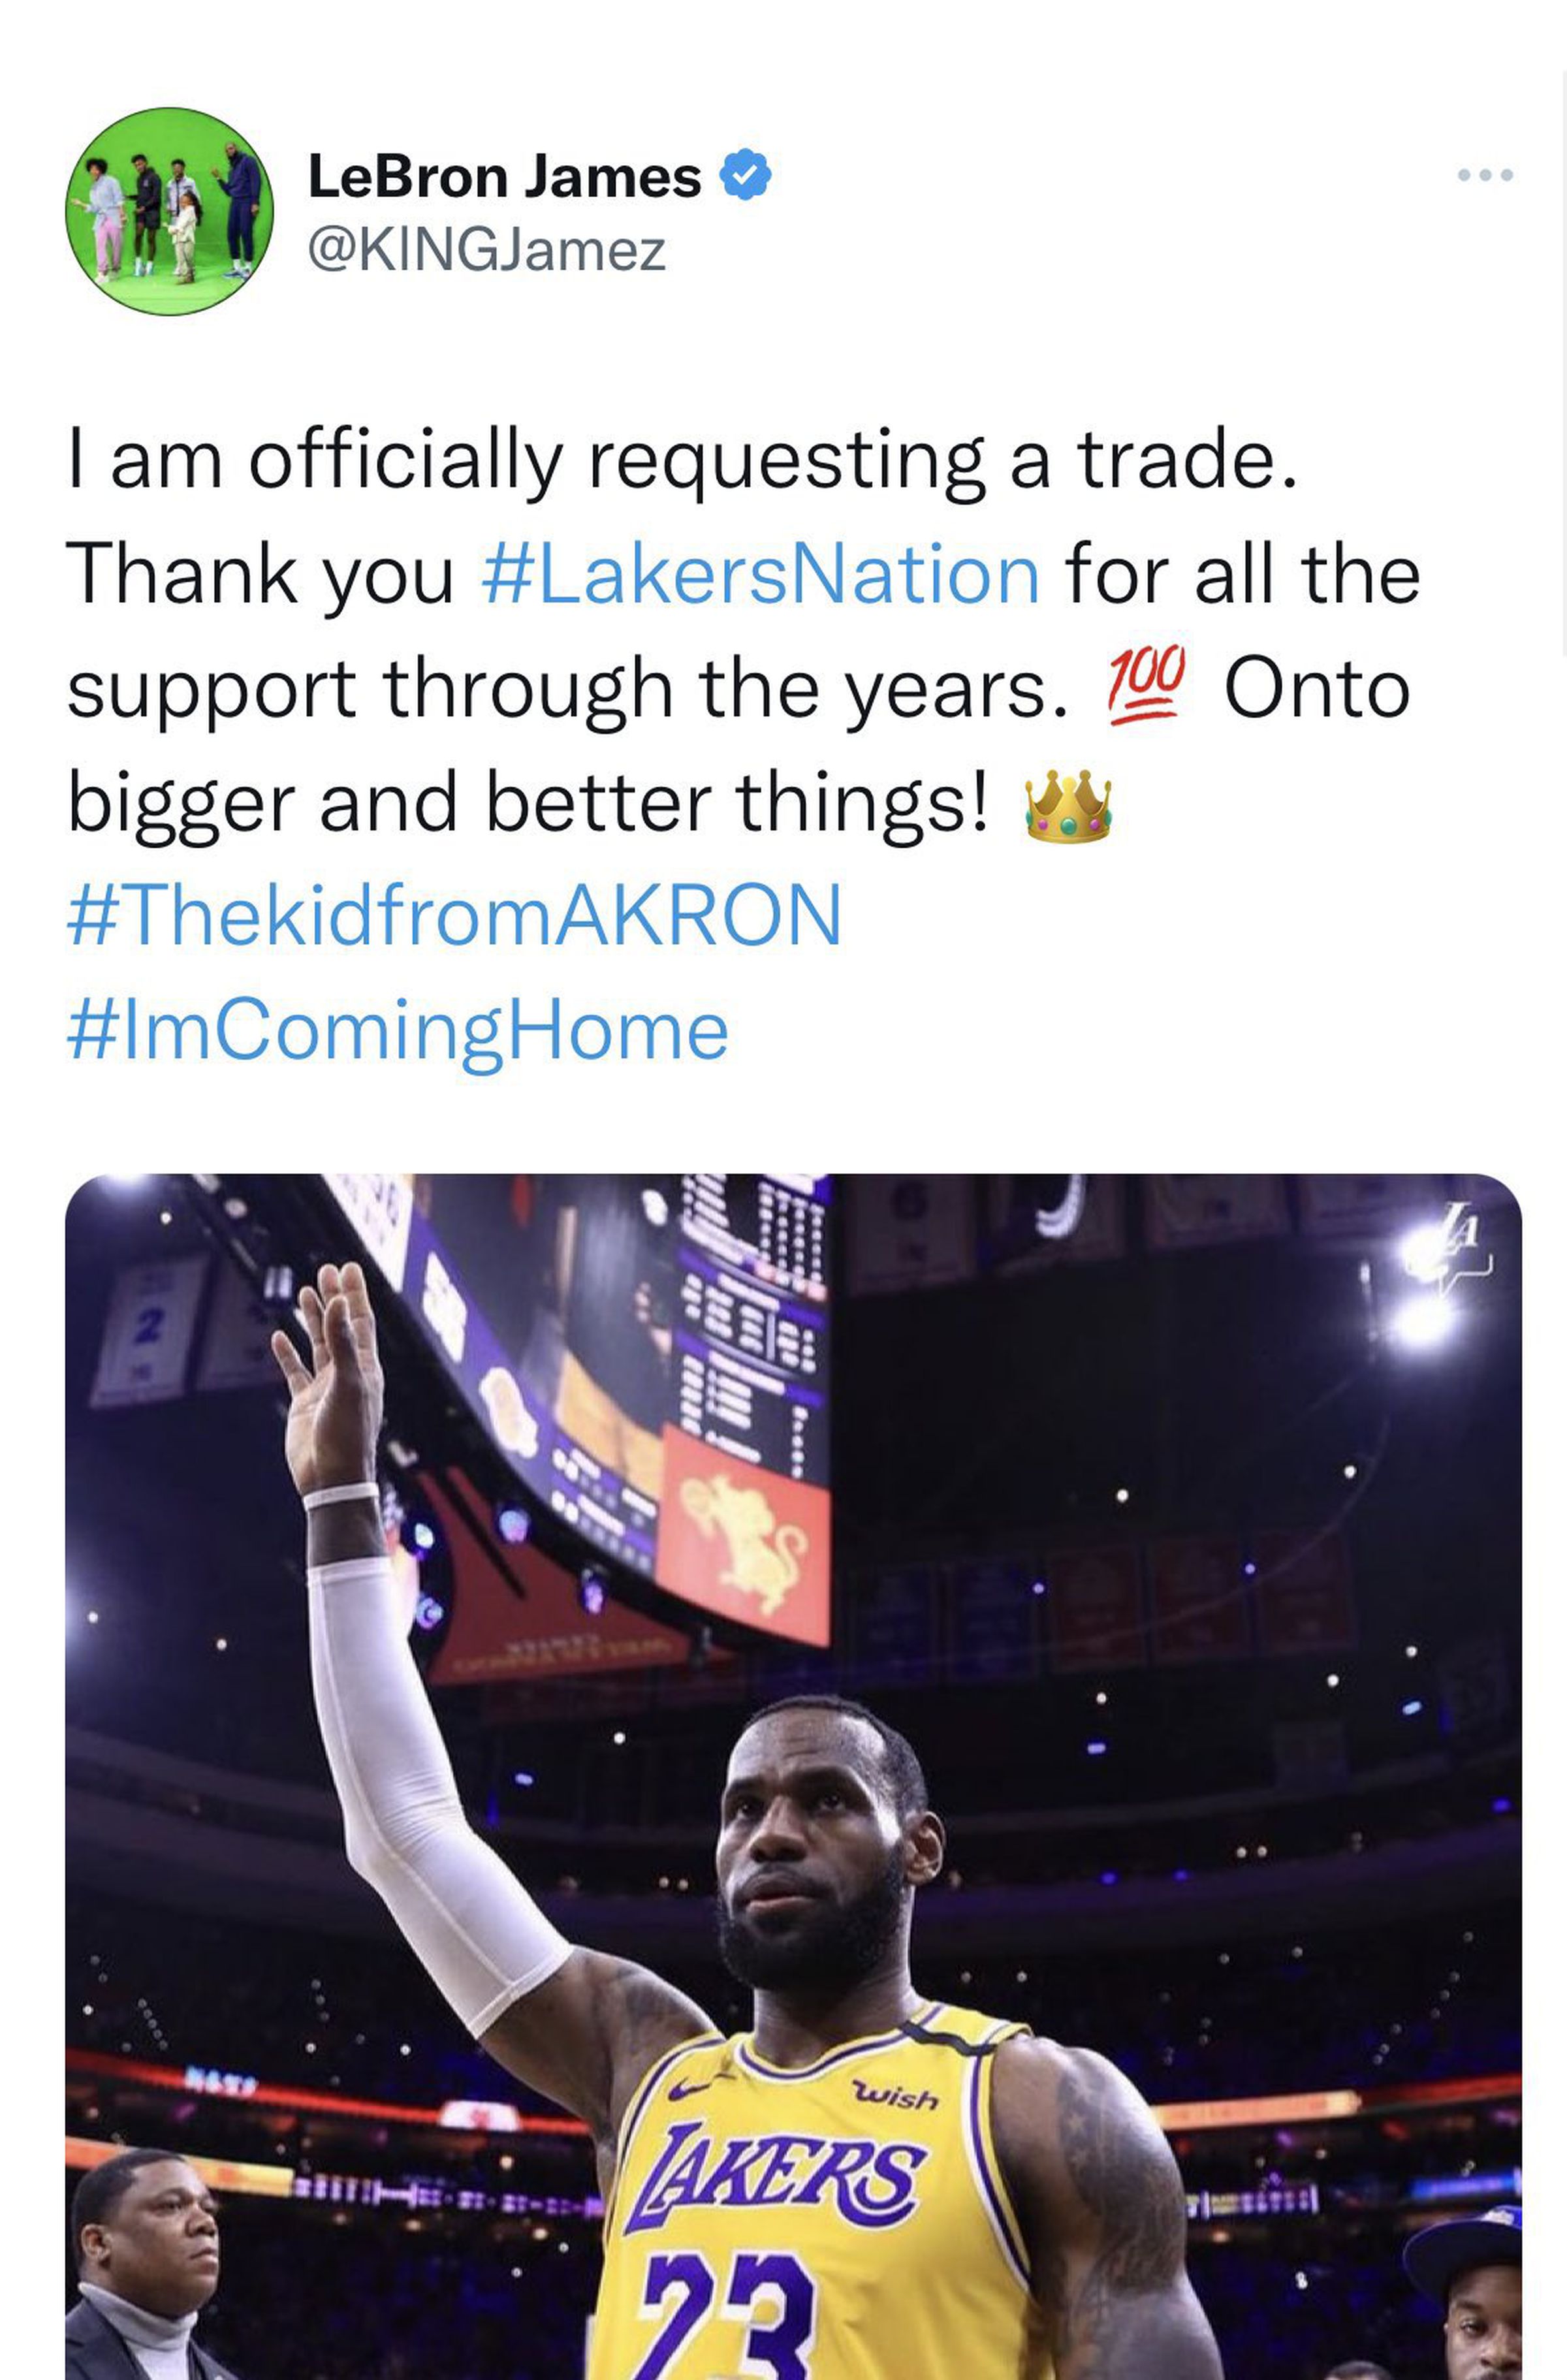 “LeBron James” says he’s officially requesting a trade away from the Lakers.